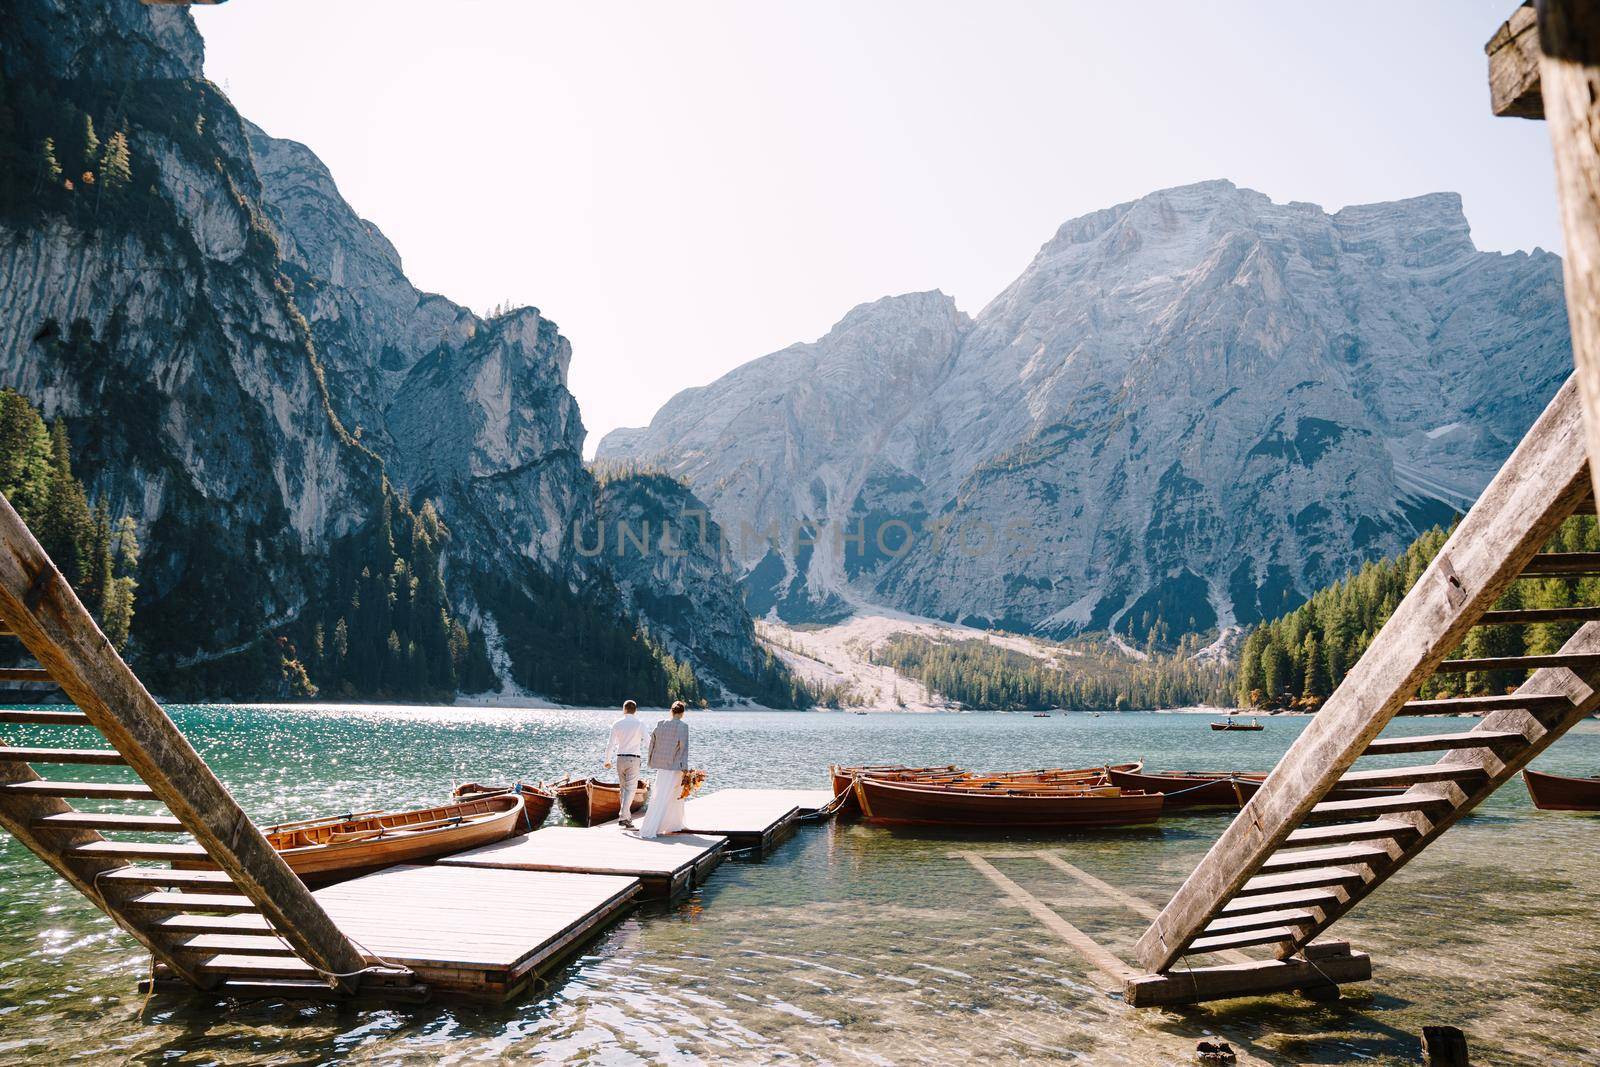 The bride and groom walk along a wooden boat dock at the Lago di Braies in Italy. Wedding in Europe, on Braies lake. Newlyweds walk, kiss, hug on a background of rocky mountains. by Nadtochiy